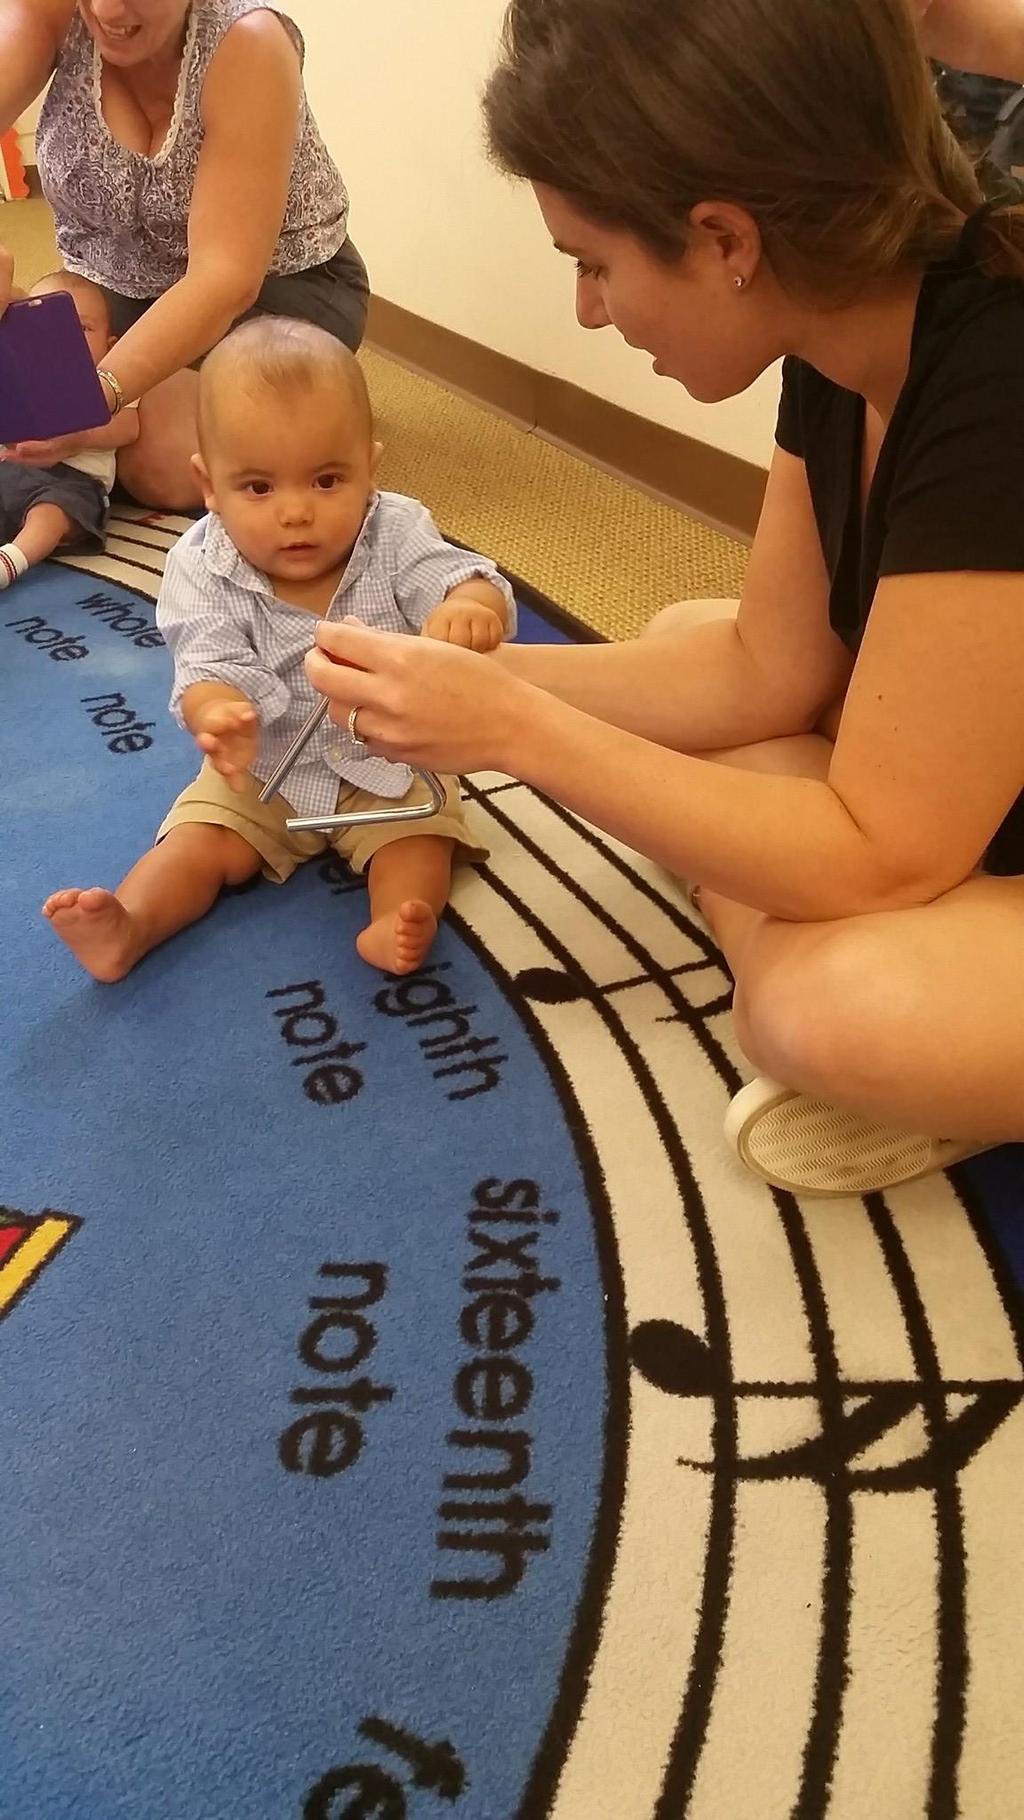 LITTLE CANES LEVEL I Ages 6-15 months This class provides a fun and relaxed environment for parents and children to explore music, movement, and play.